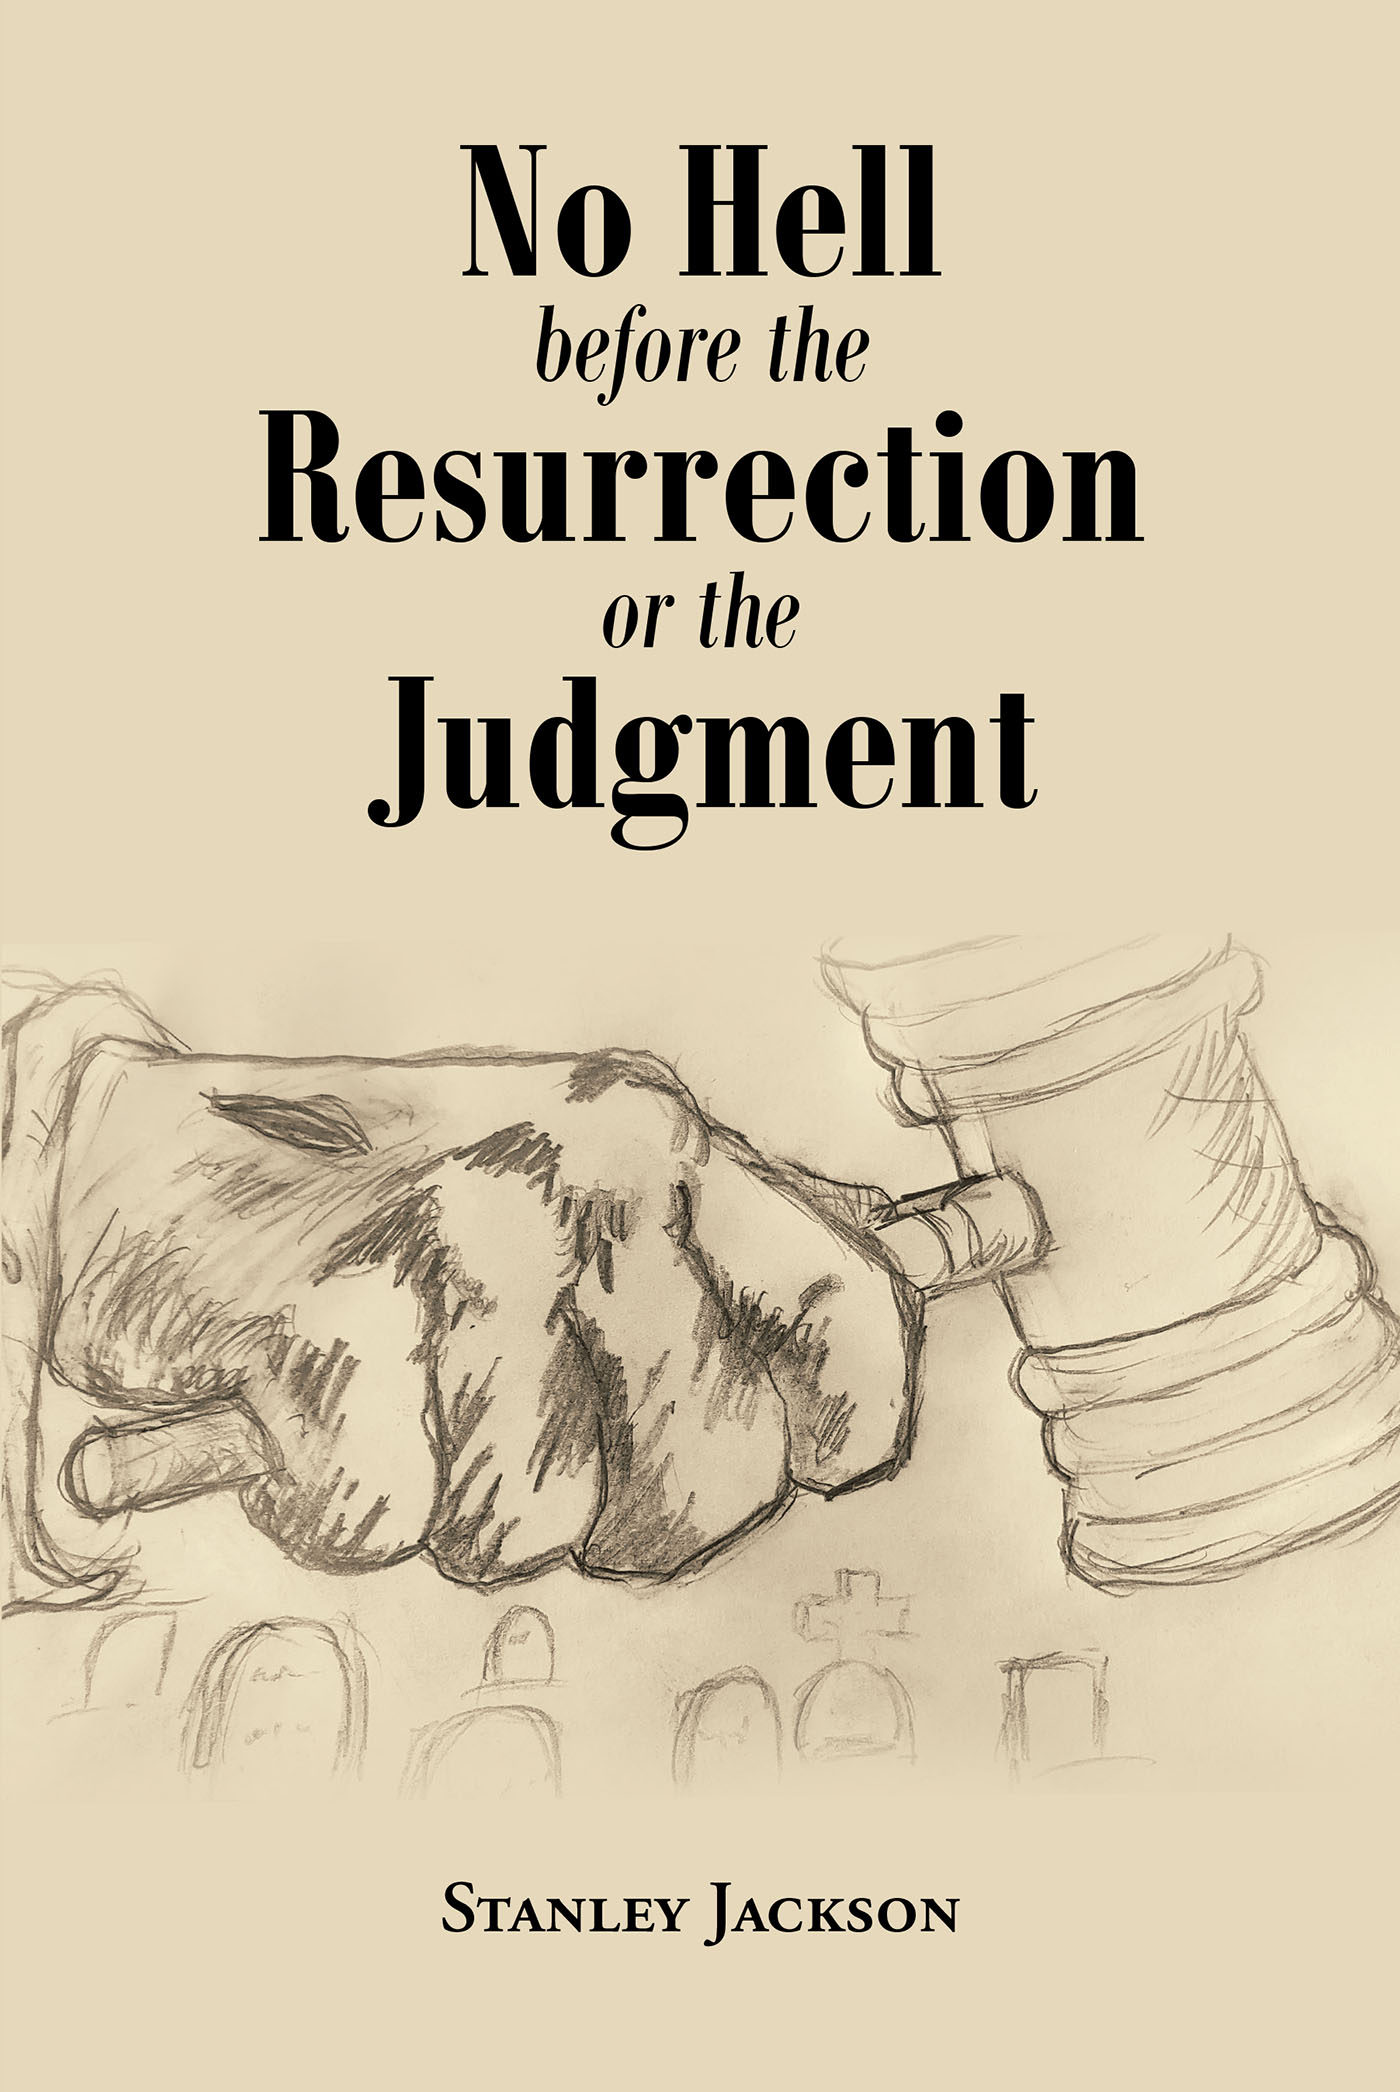 Author Stanley Jackson’s New Book, "No Hell Before the Resurrection or the Judgment," is a Fascinating In-Depth Analysis of the Bible That Explores a Common Misconception